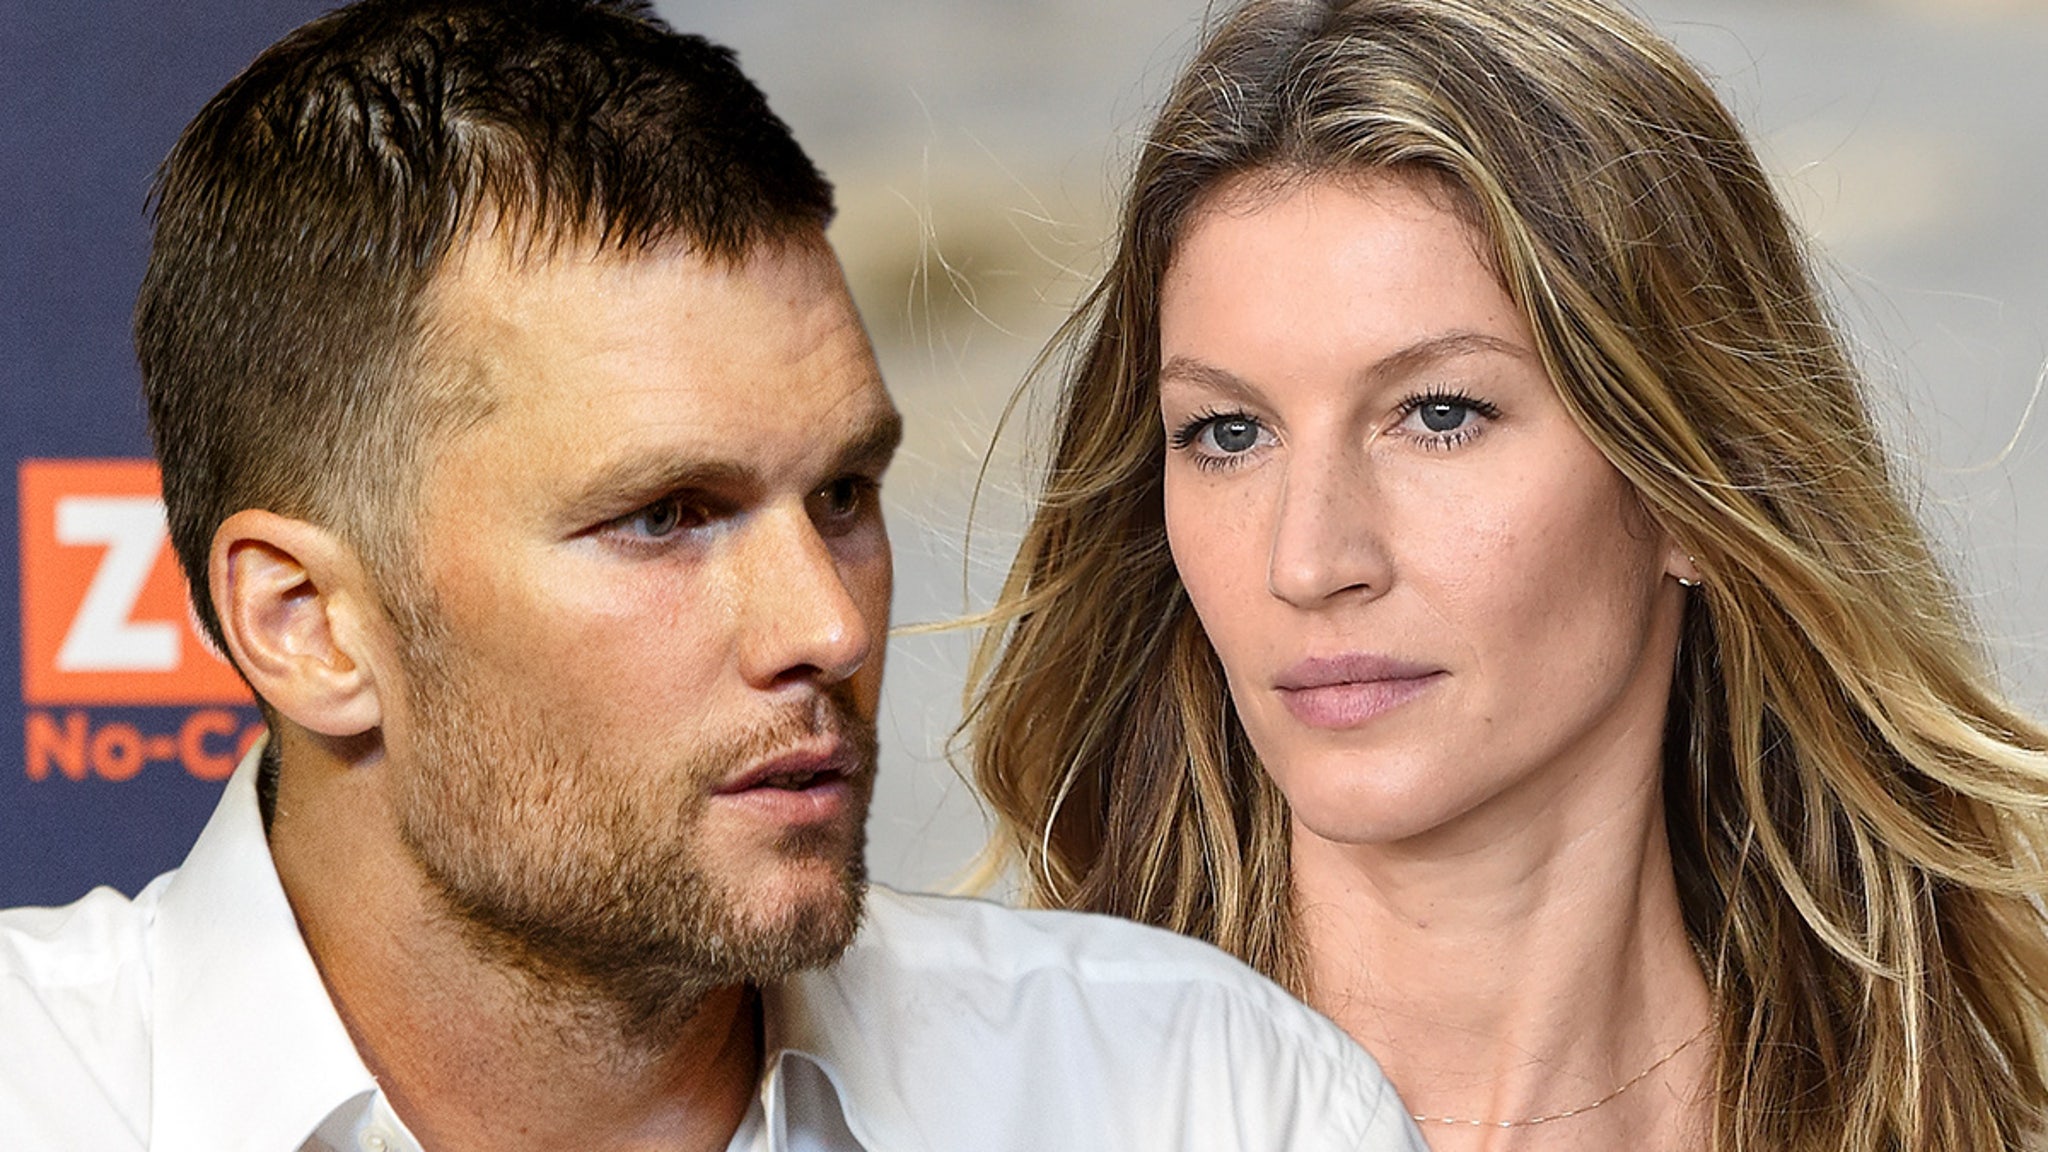 Tom Brady and Gisele Bündchen in search of divorce lawyers for weeks